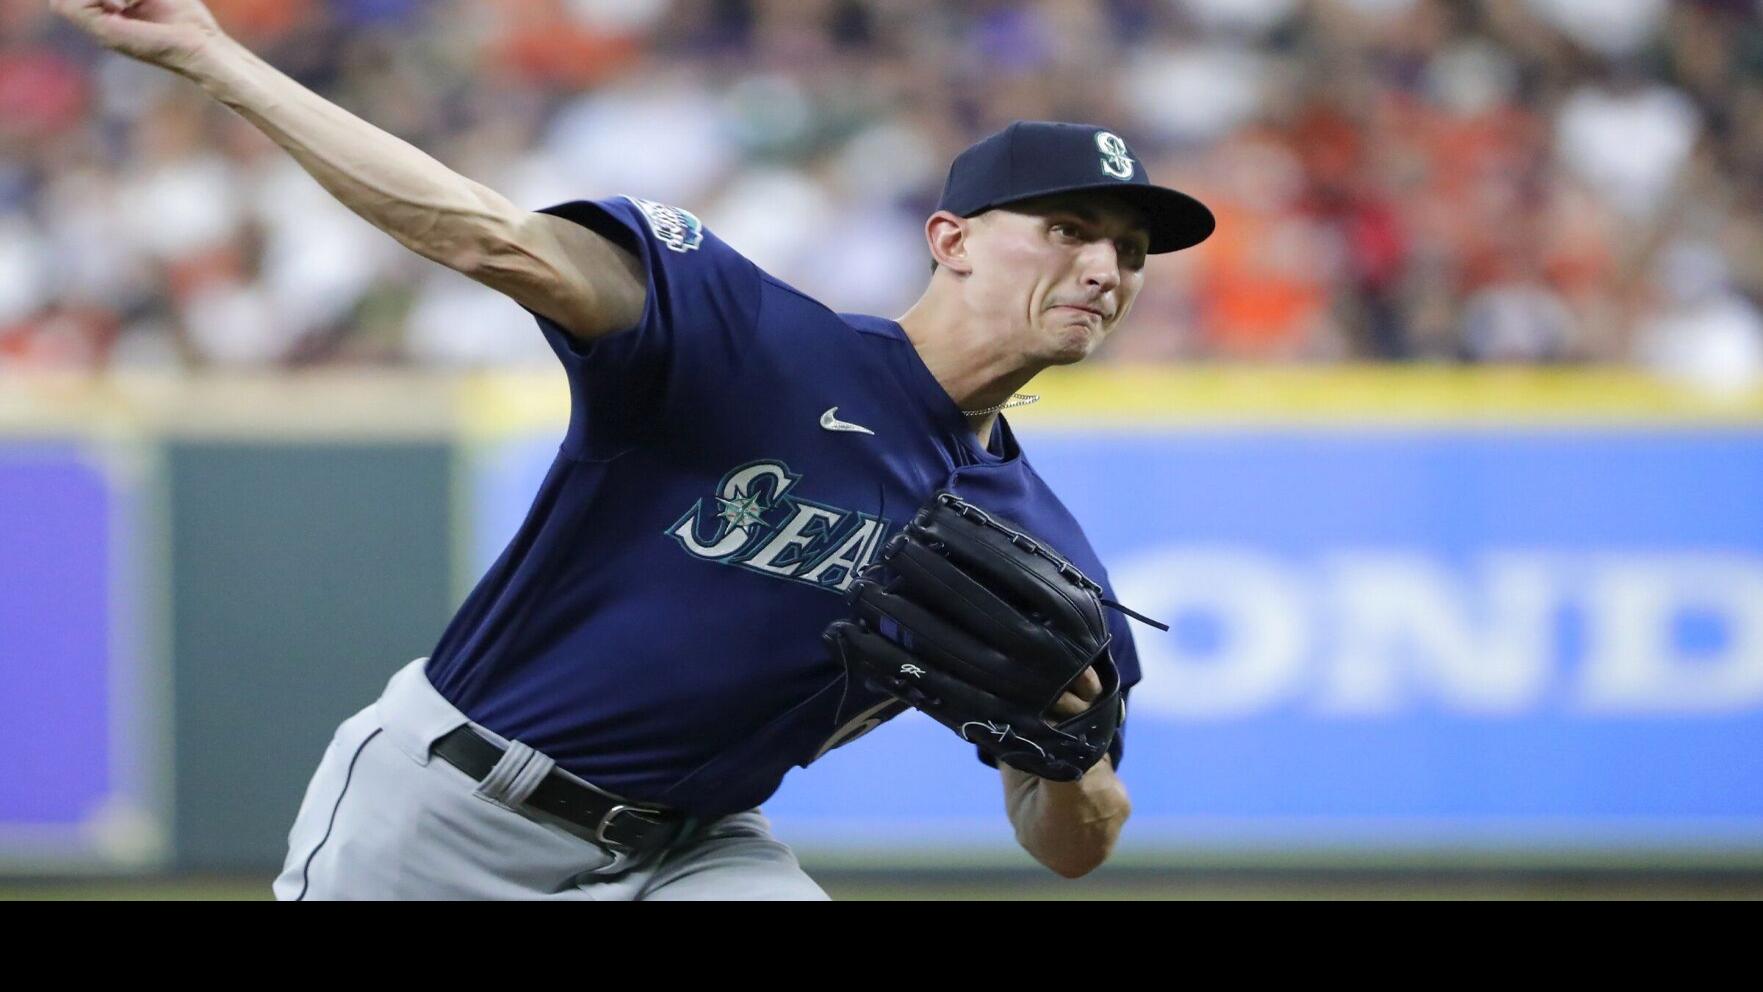 George Kirby shows why he's an All-Star, pitching Mariners past